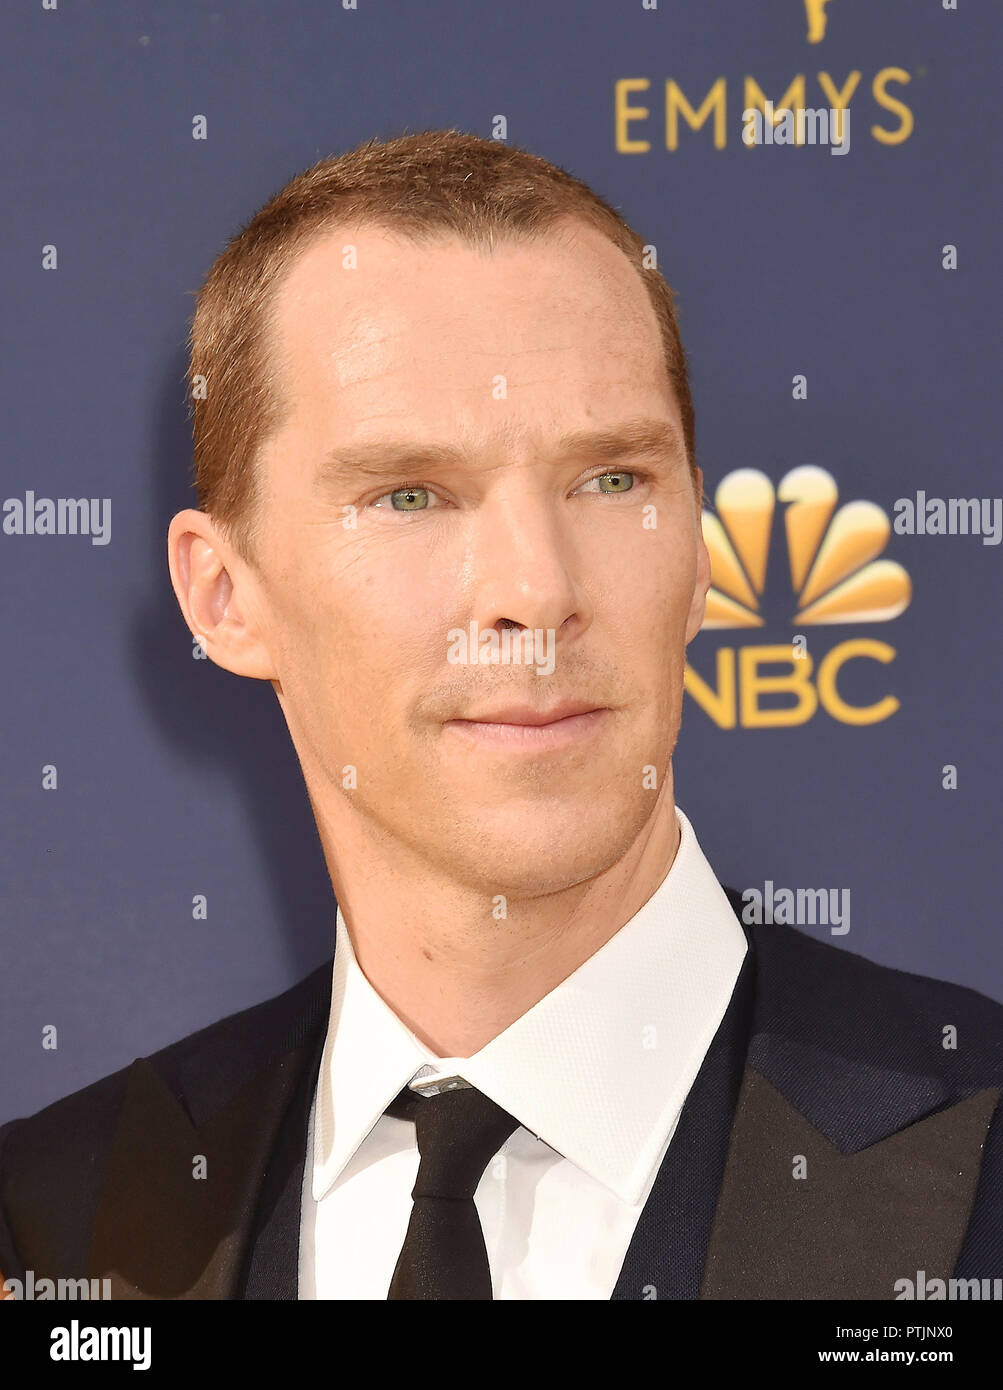 BENEDICT CUMBERBATCH English film actor at the 70th Emmy Awards at Microsoft Theater on September 17, 2018 in Los Angeles, California. Photo: Jeffrey Mayer Stock Photo